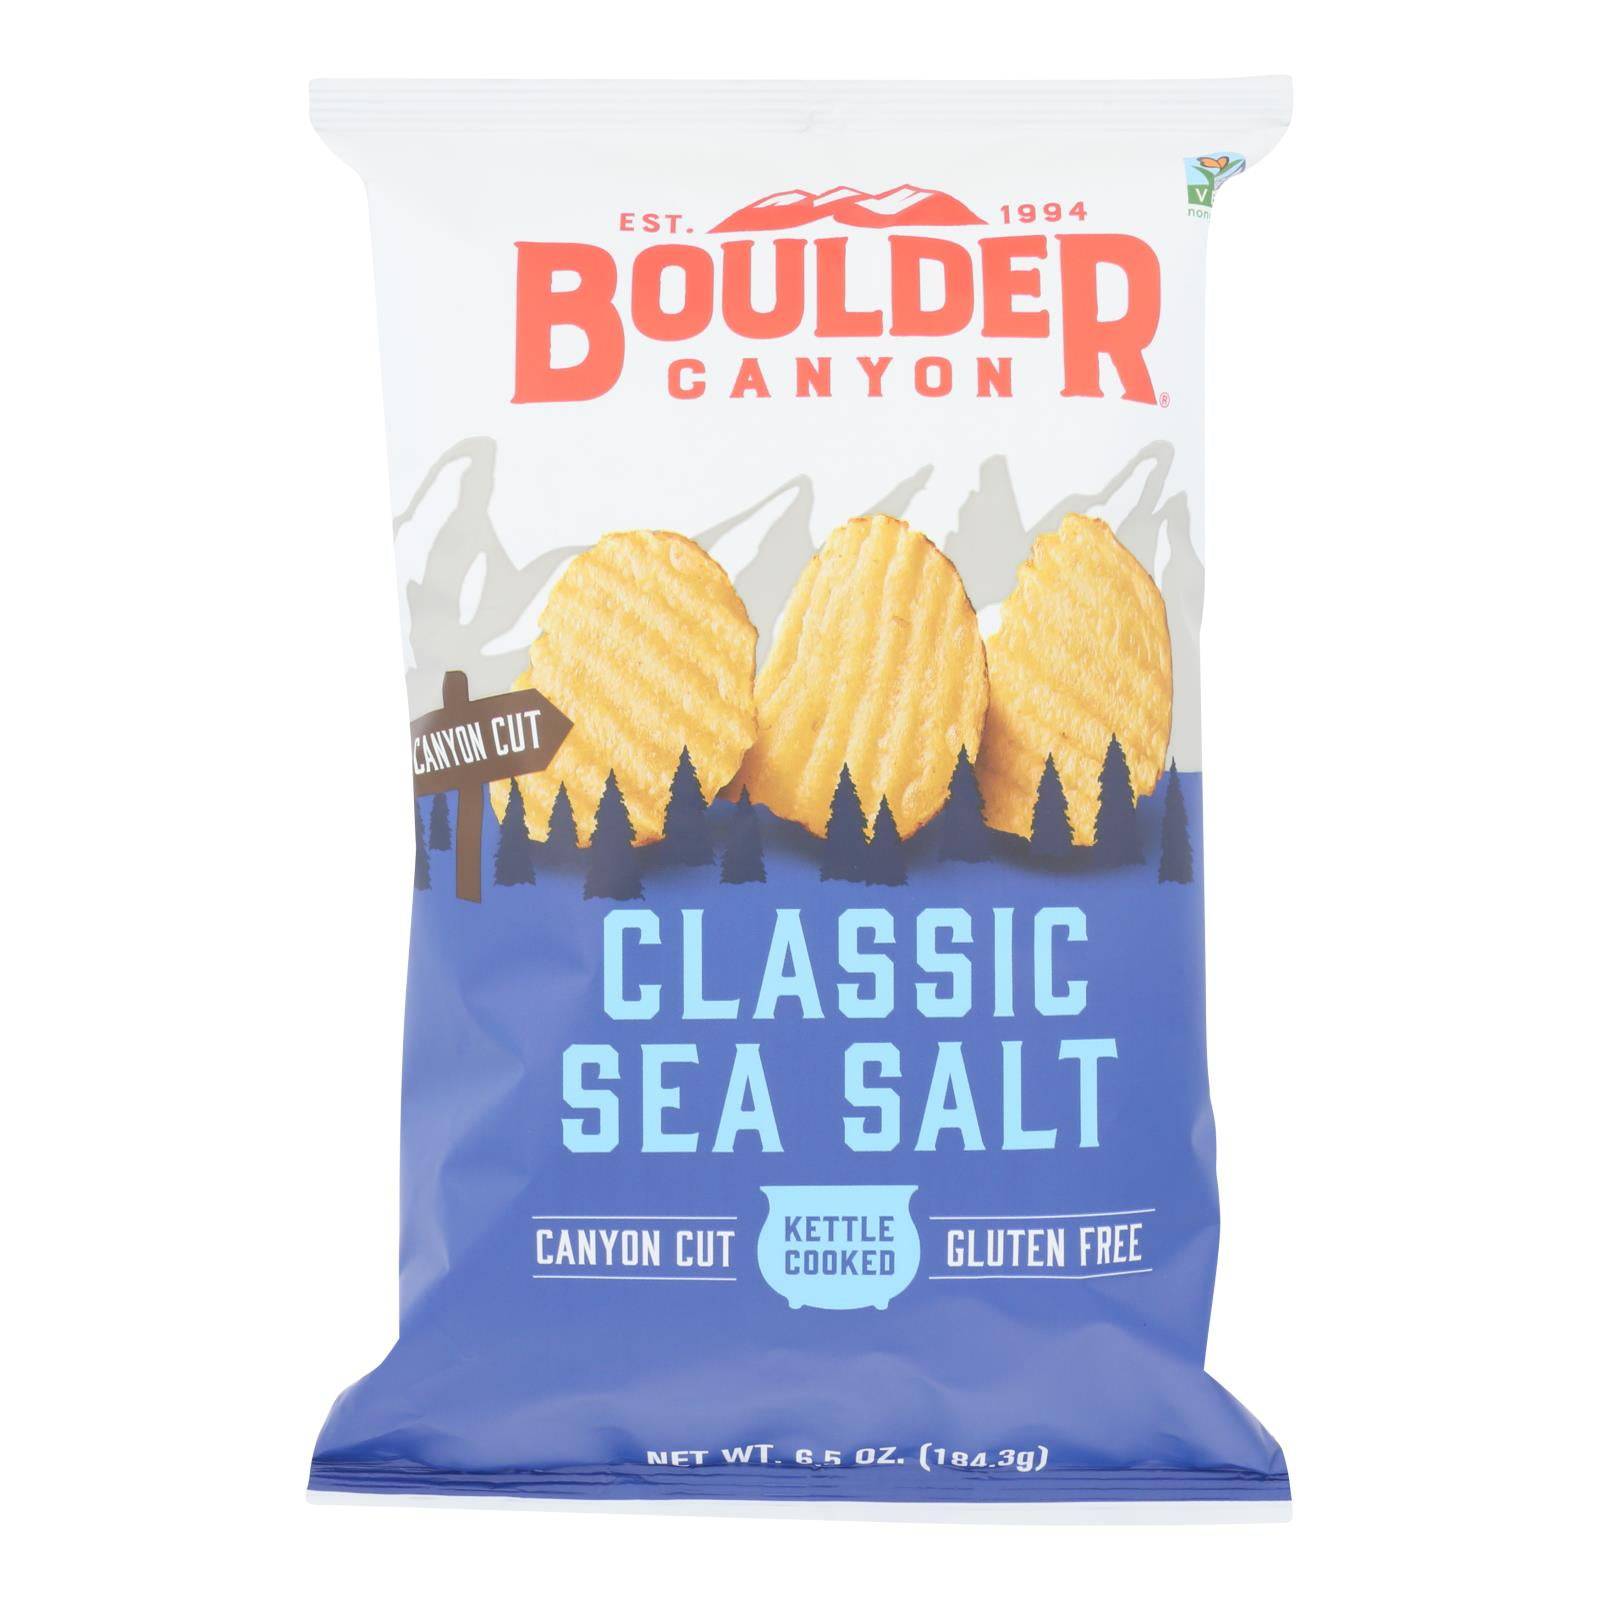 Boulder Canyon - Kettle Cooked Canyon Cut Potato Chips -natural - Case Of 12 - 6.5 Oz | OnlyNaturals.us